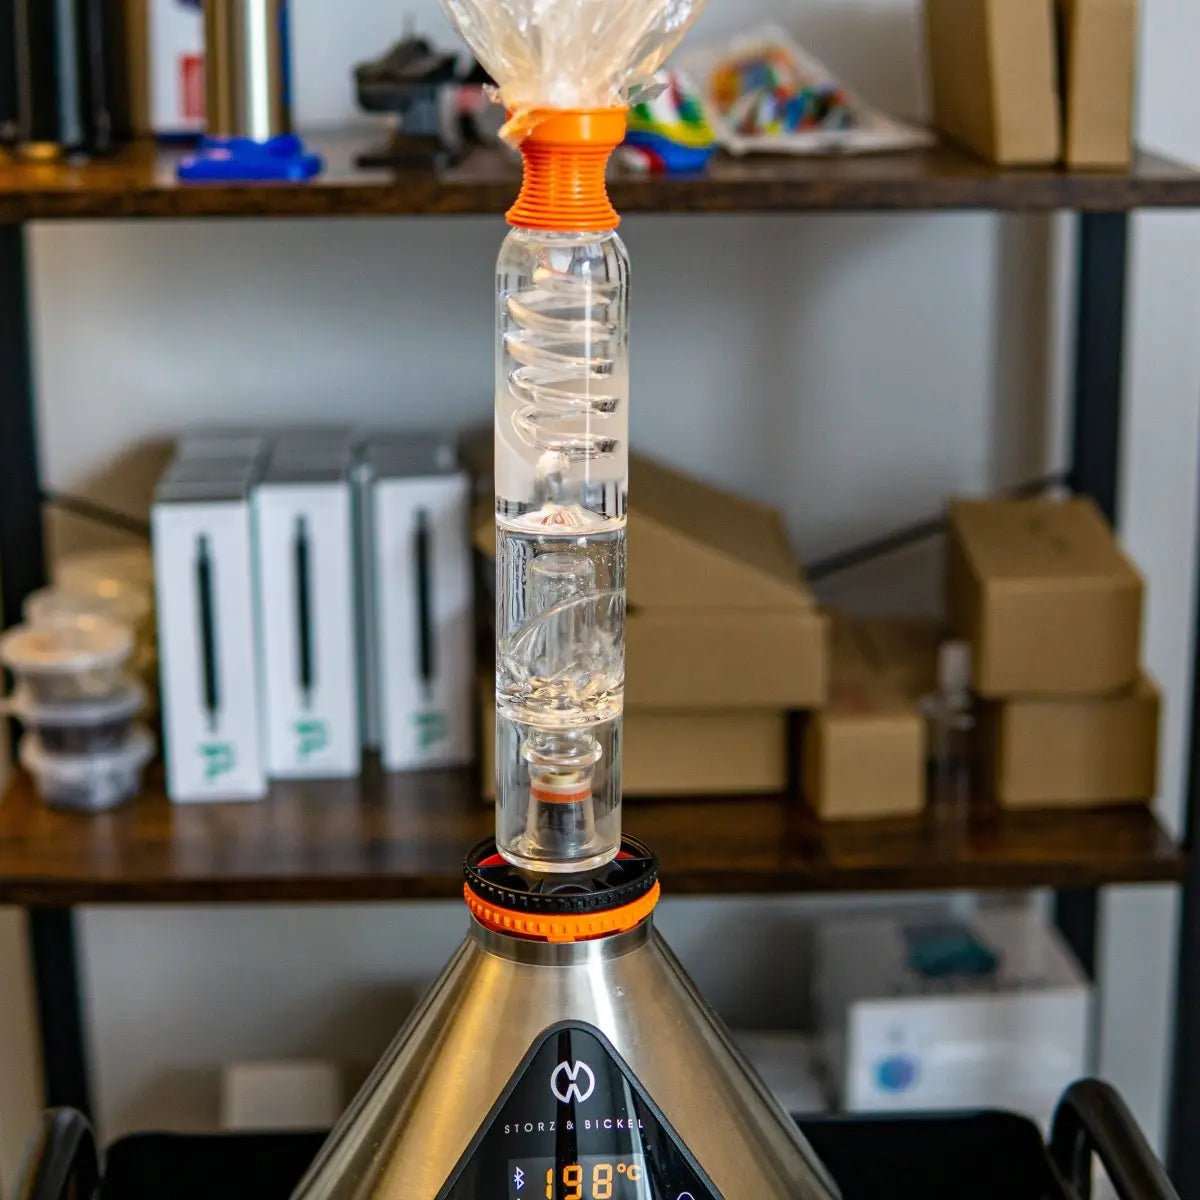 The Glacier Tube - Freeze Coil and Water Bubbler Attachment for the Volcano Hybrid - Terp Chasers Club